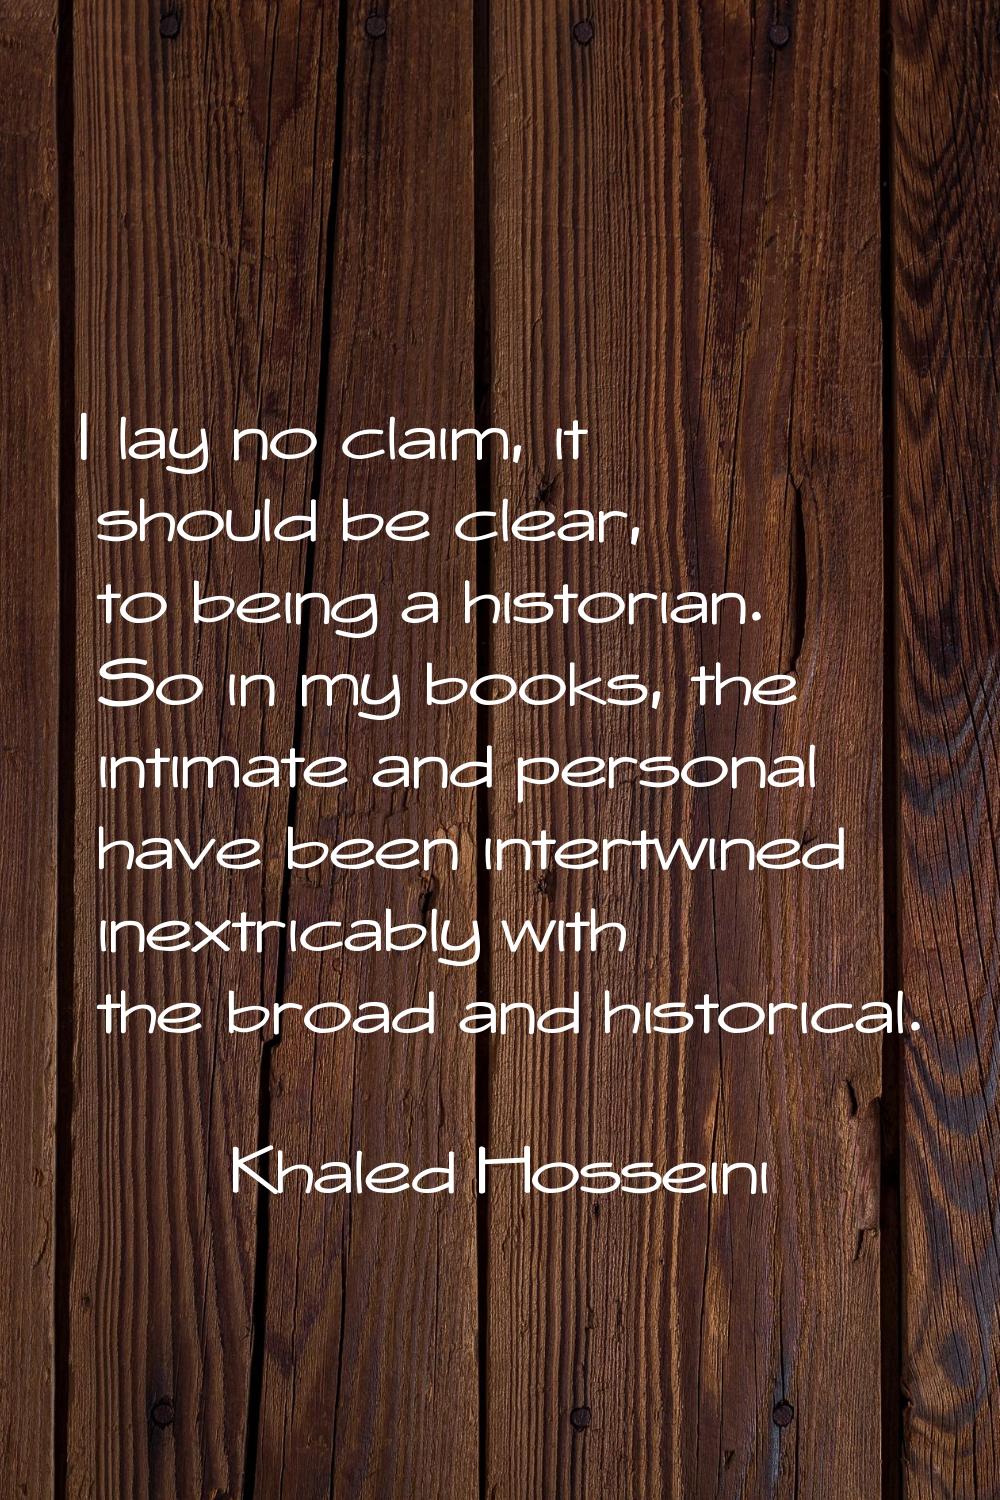 I lay no claim, it should be clear, to being a historian. So in my books, the intimate and personal